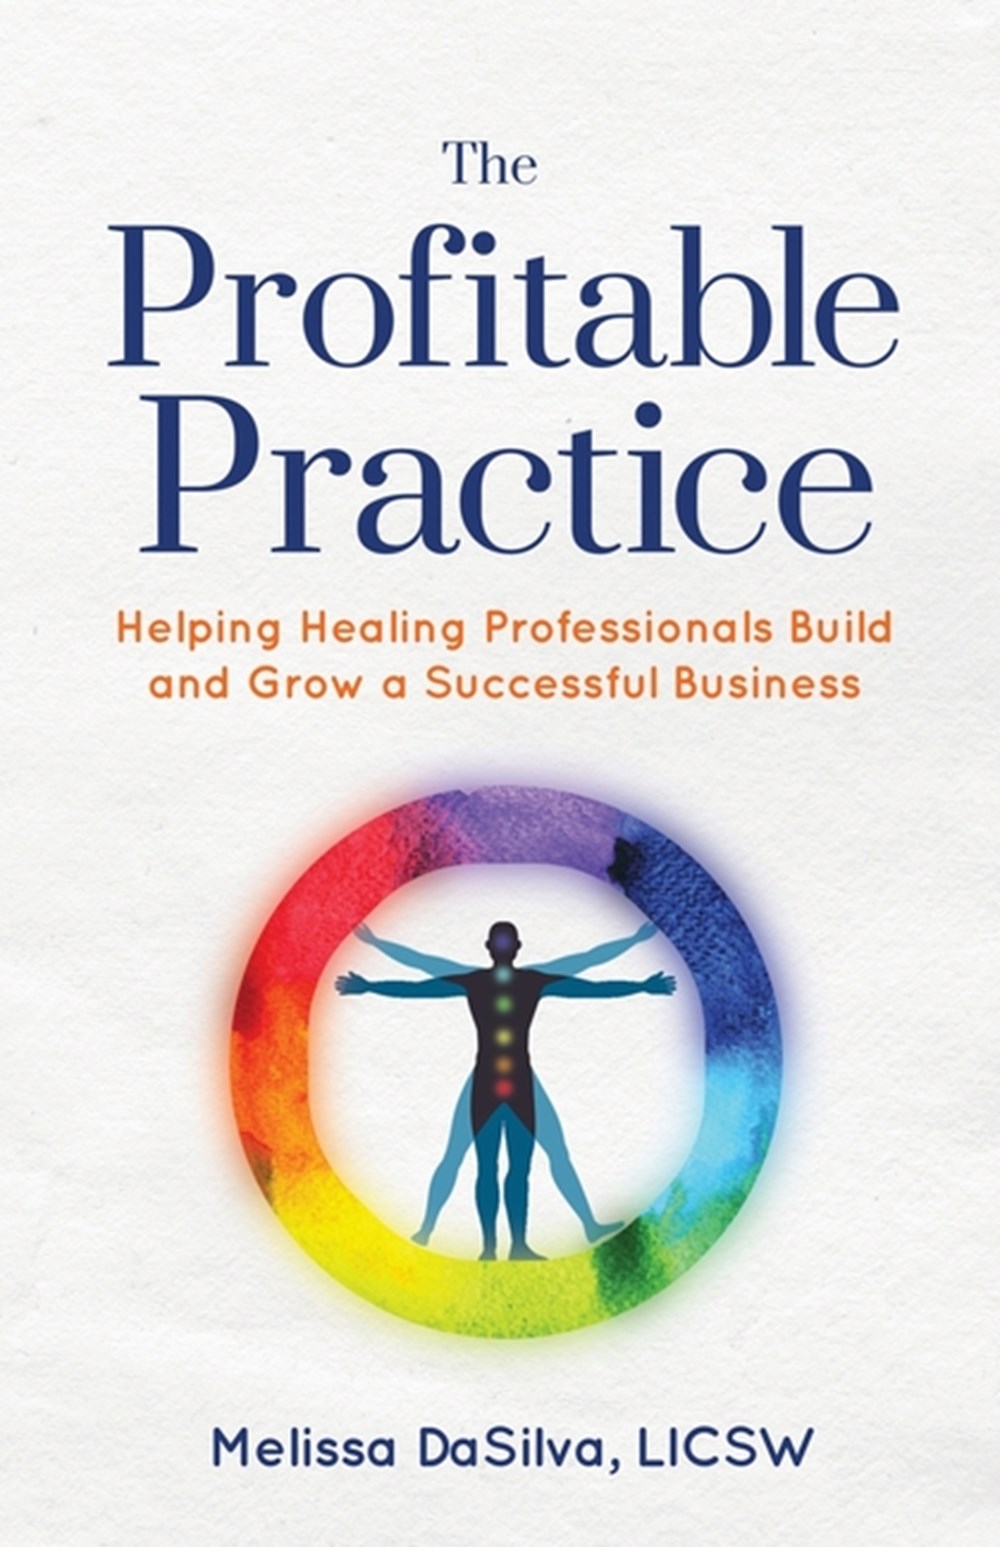 Profitable Practice: Helping Healing Professionals Build and Grow a Successful Business